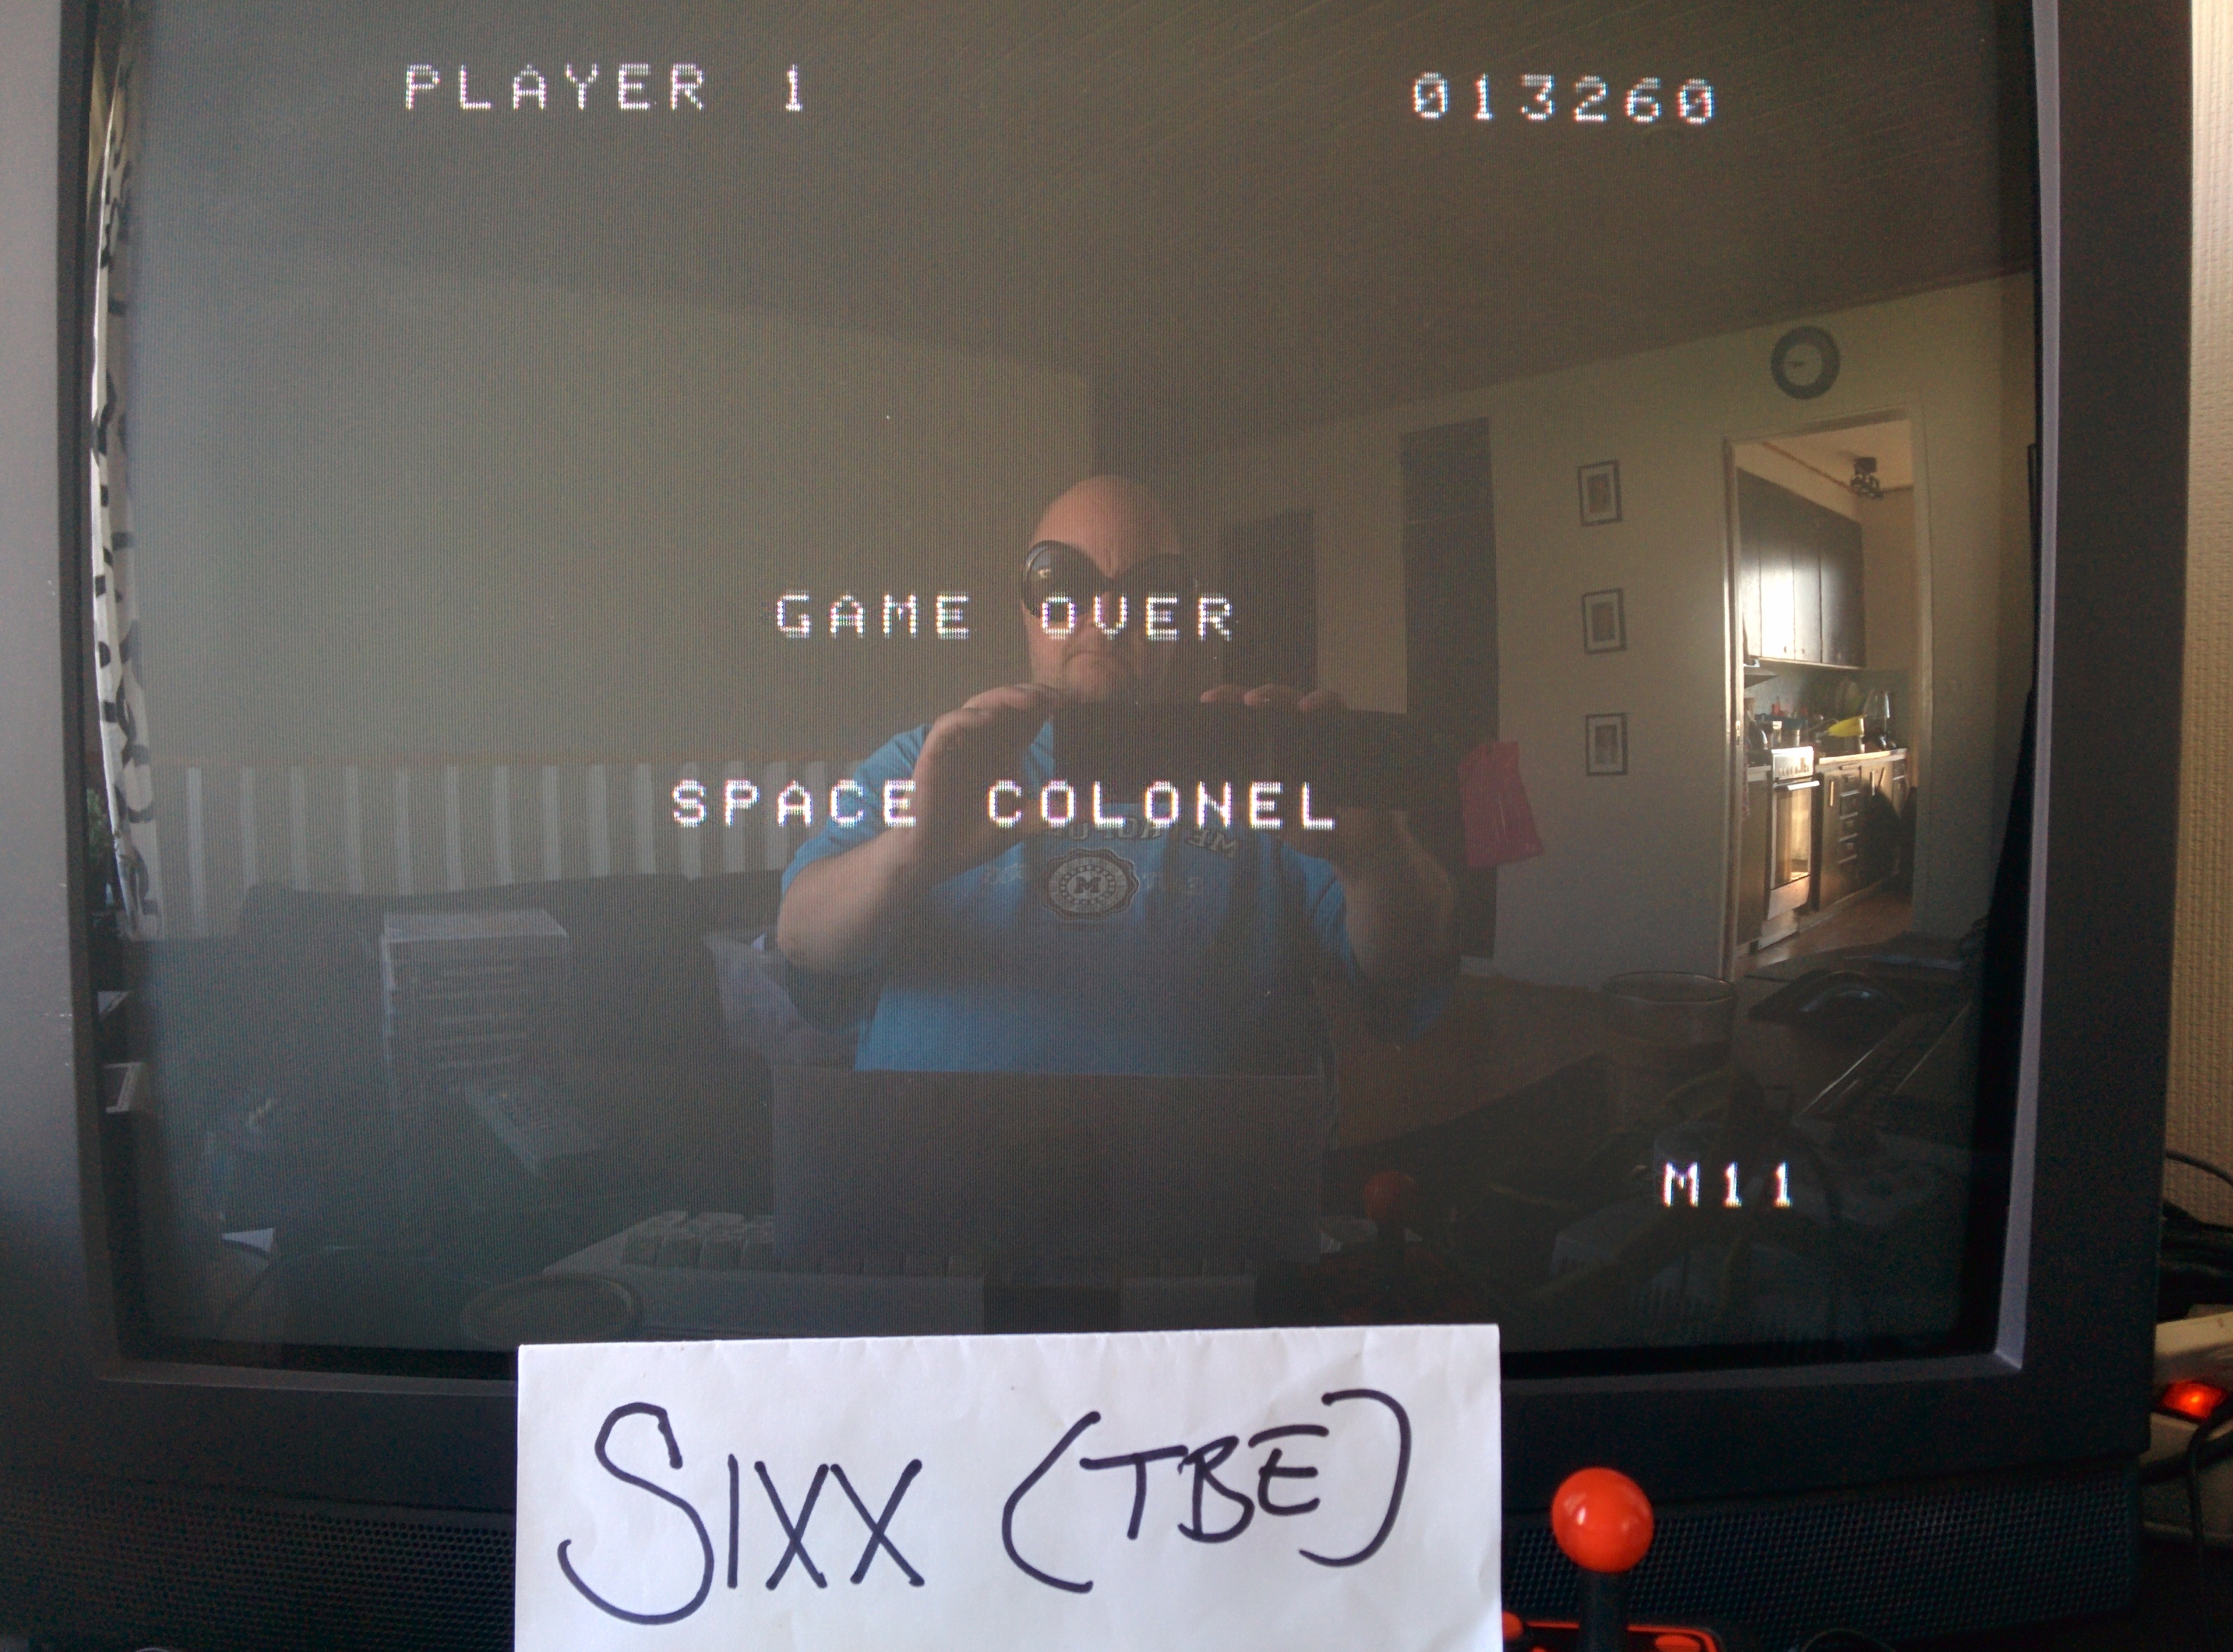 Sixx: Gorf (Colecovision Emulated) 13,260 points on 2014-05-20 07:14:16